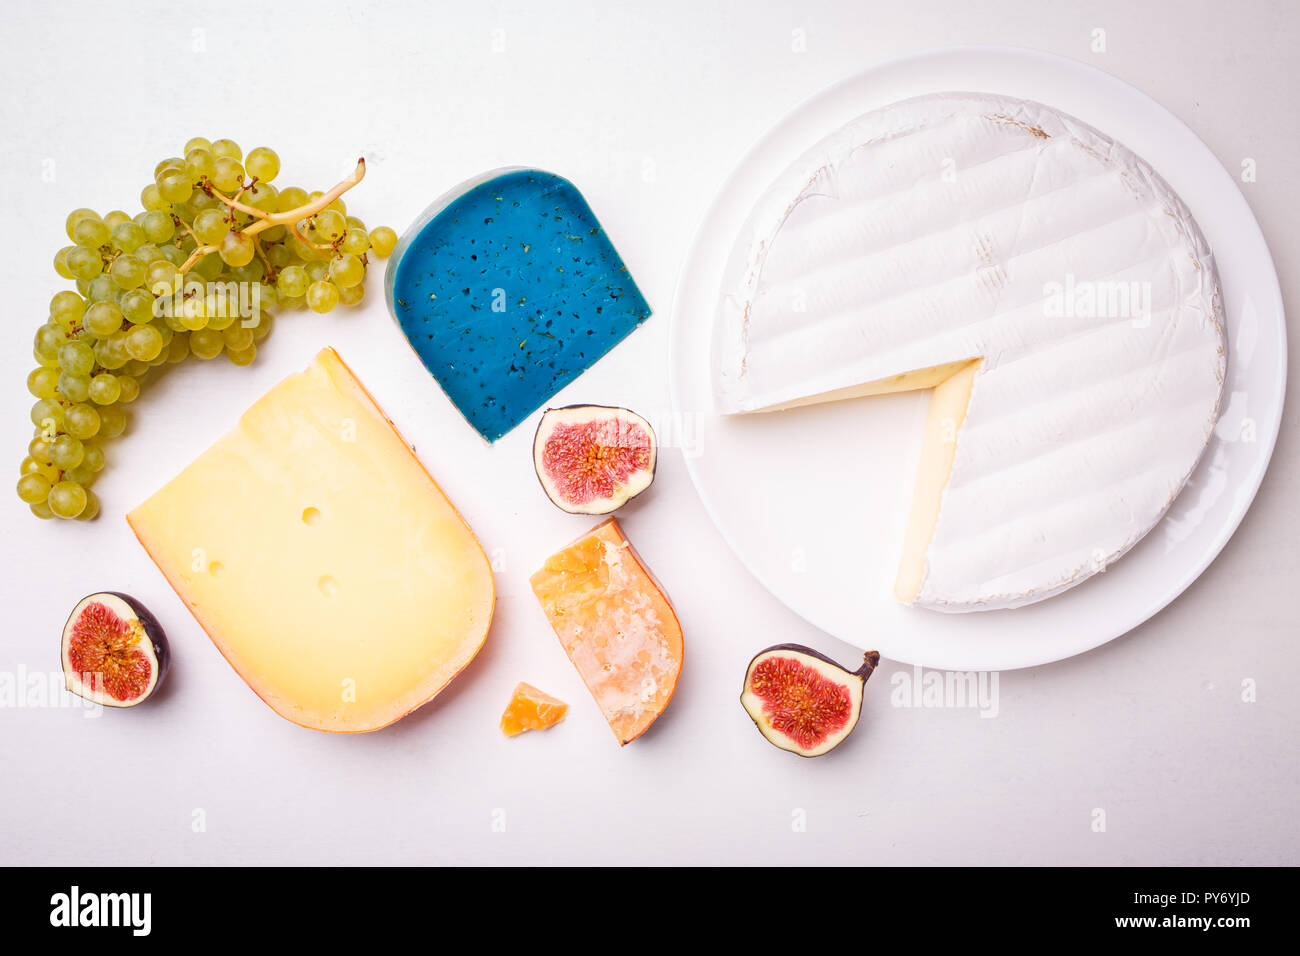 Variety of different cheese with nuts and grapes on the table. Top view image of soft and hard cheeses Stock Photo